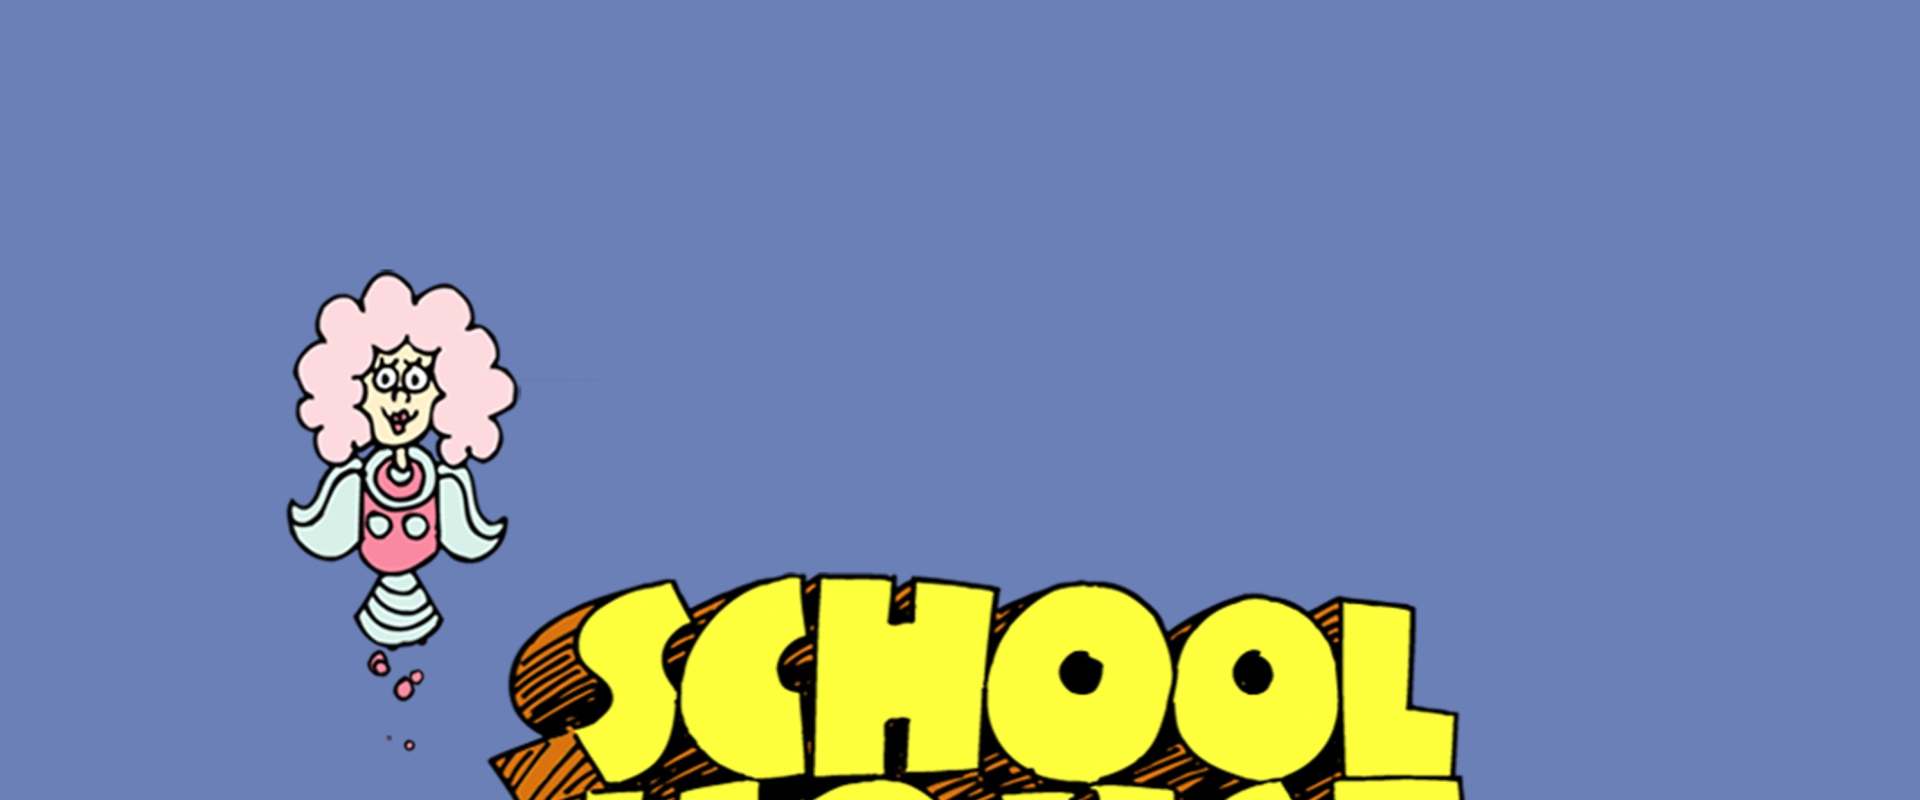 Schoolhouse Rock! 50th Anniversary Singalong background 1